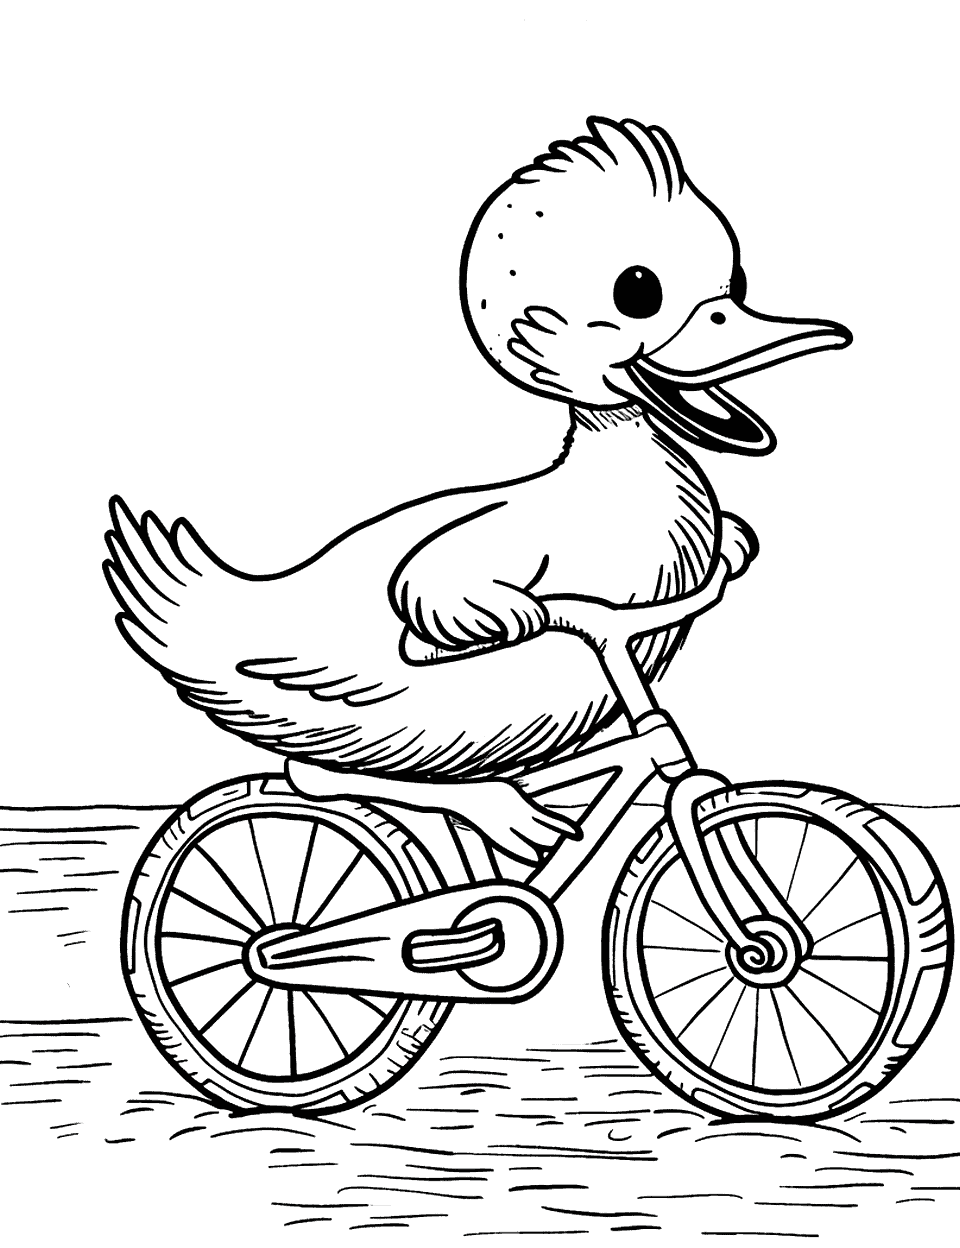 Duck Riding a Bicycle Coloring Page - A happy duck pedaling a bicycle, enjoying a ride in the park.